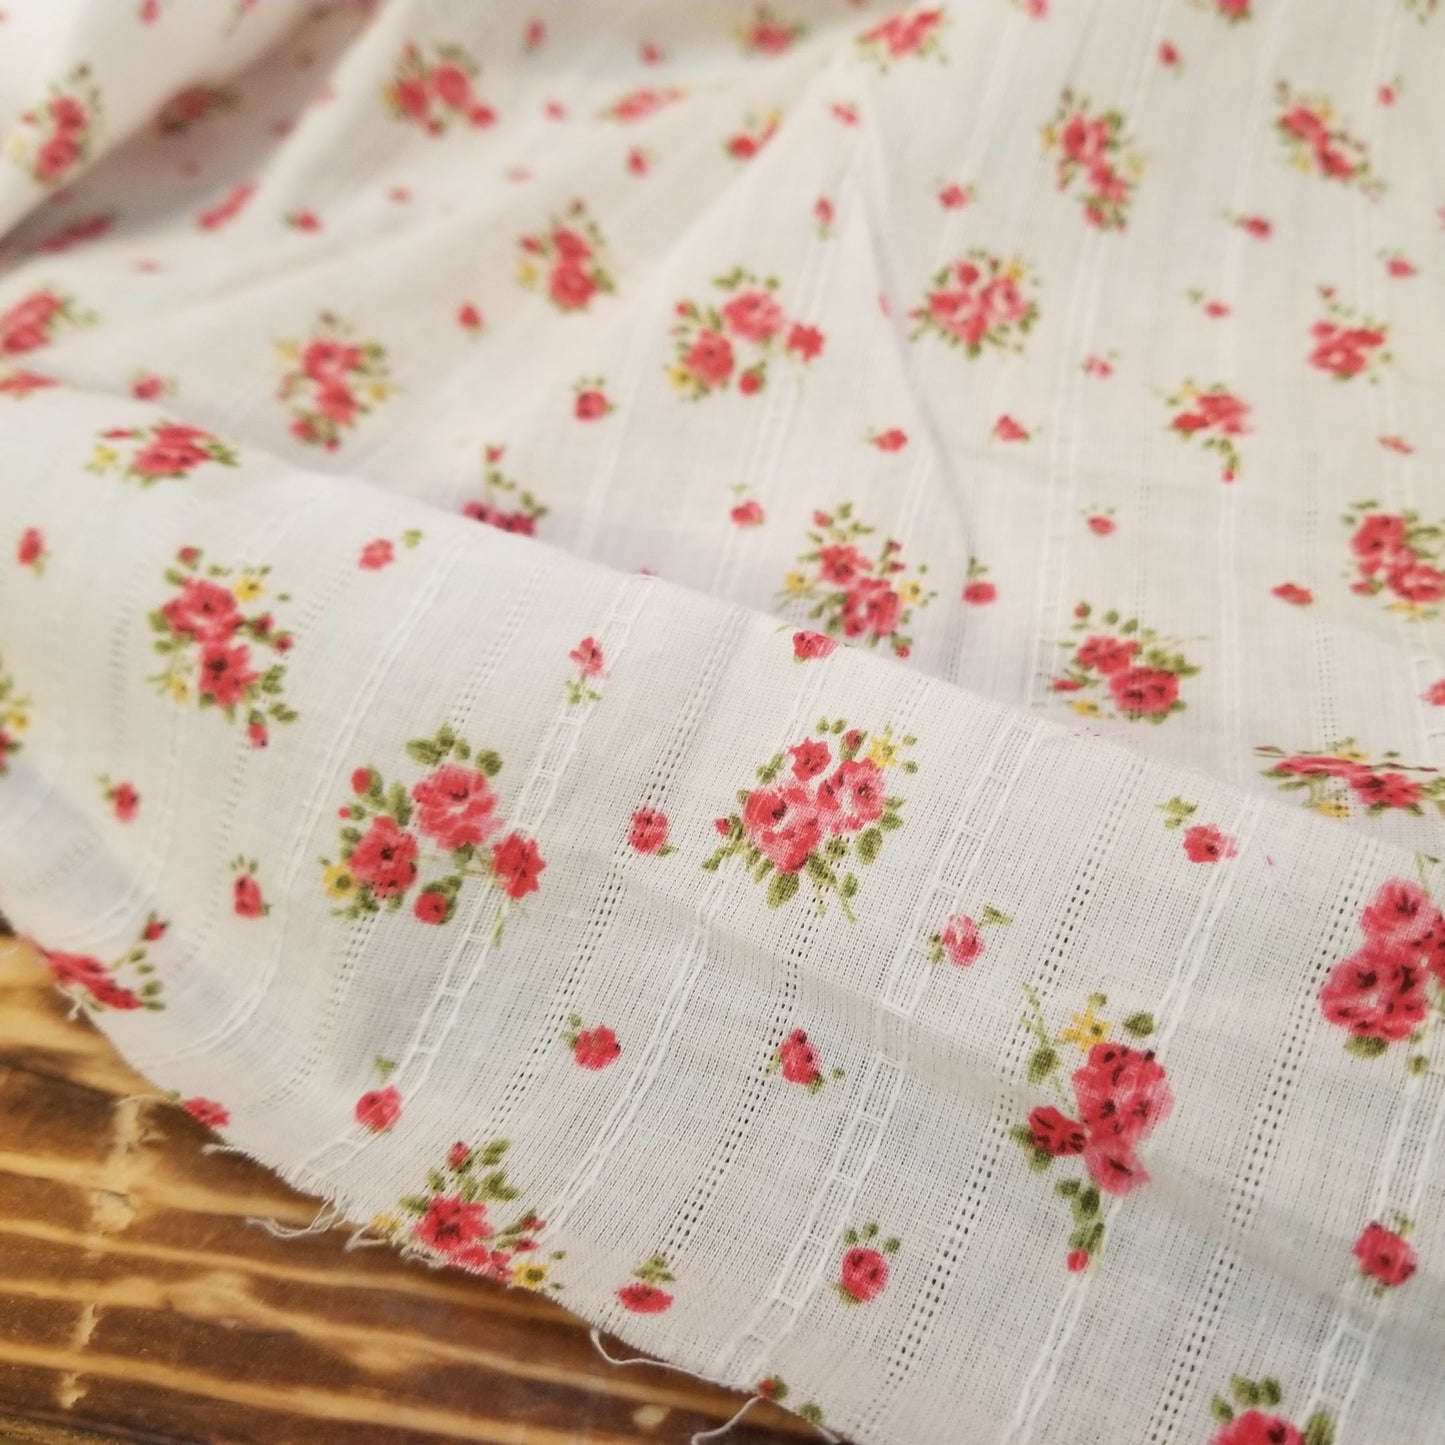 Designer Deadstock Vintage Cottage Roses White and Coral 100% Cotton Textured 3oz Lawn- Sold by the yard